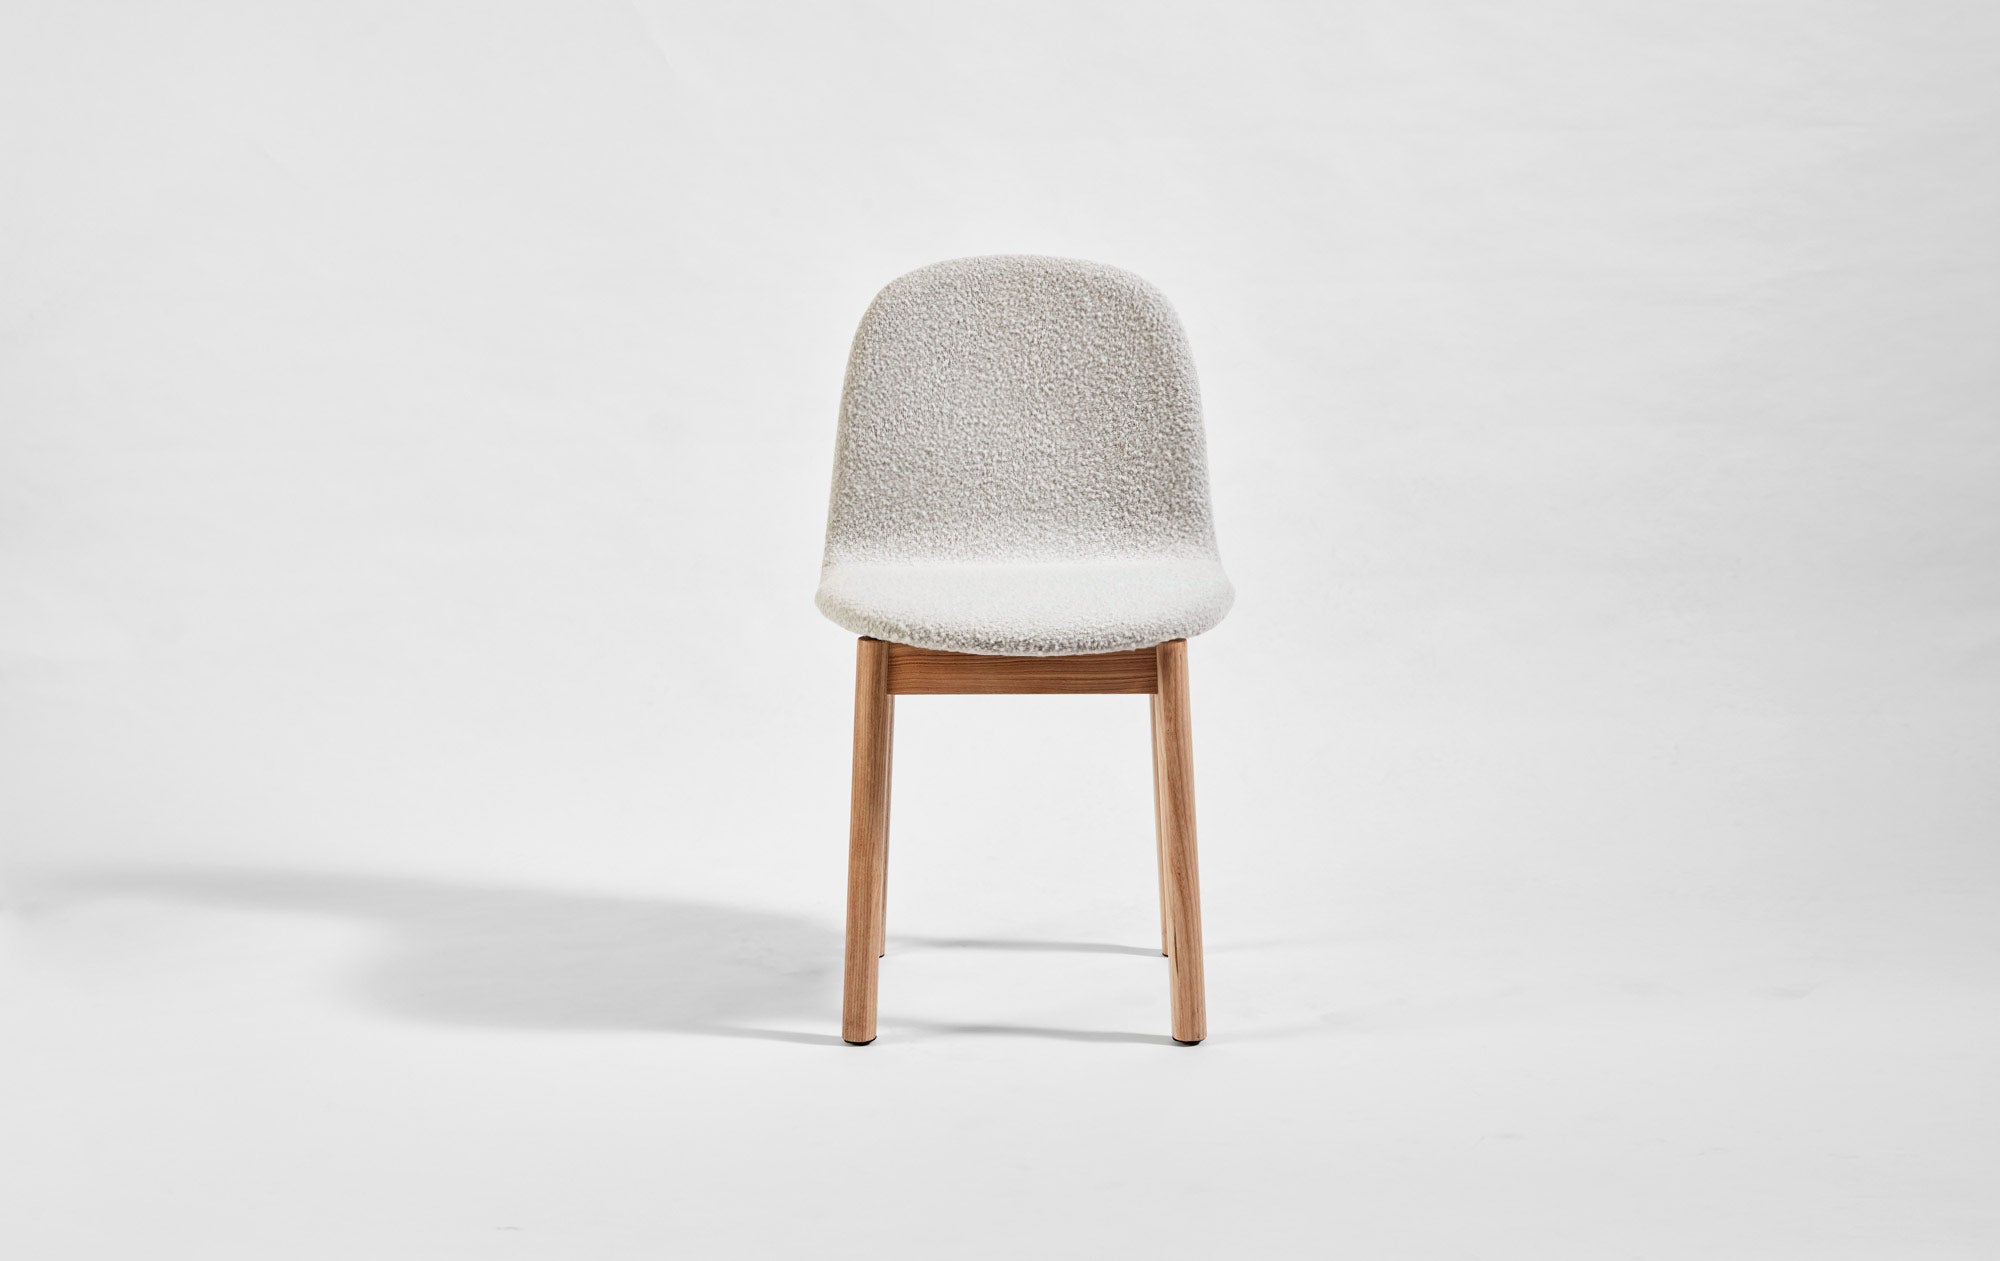 Potato Chair | Timber & Upholstered Dining Office Chair with Handle | GibsonKarlo | DesignByThem ** HF7 Elle - 0230